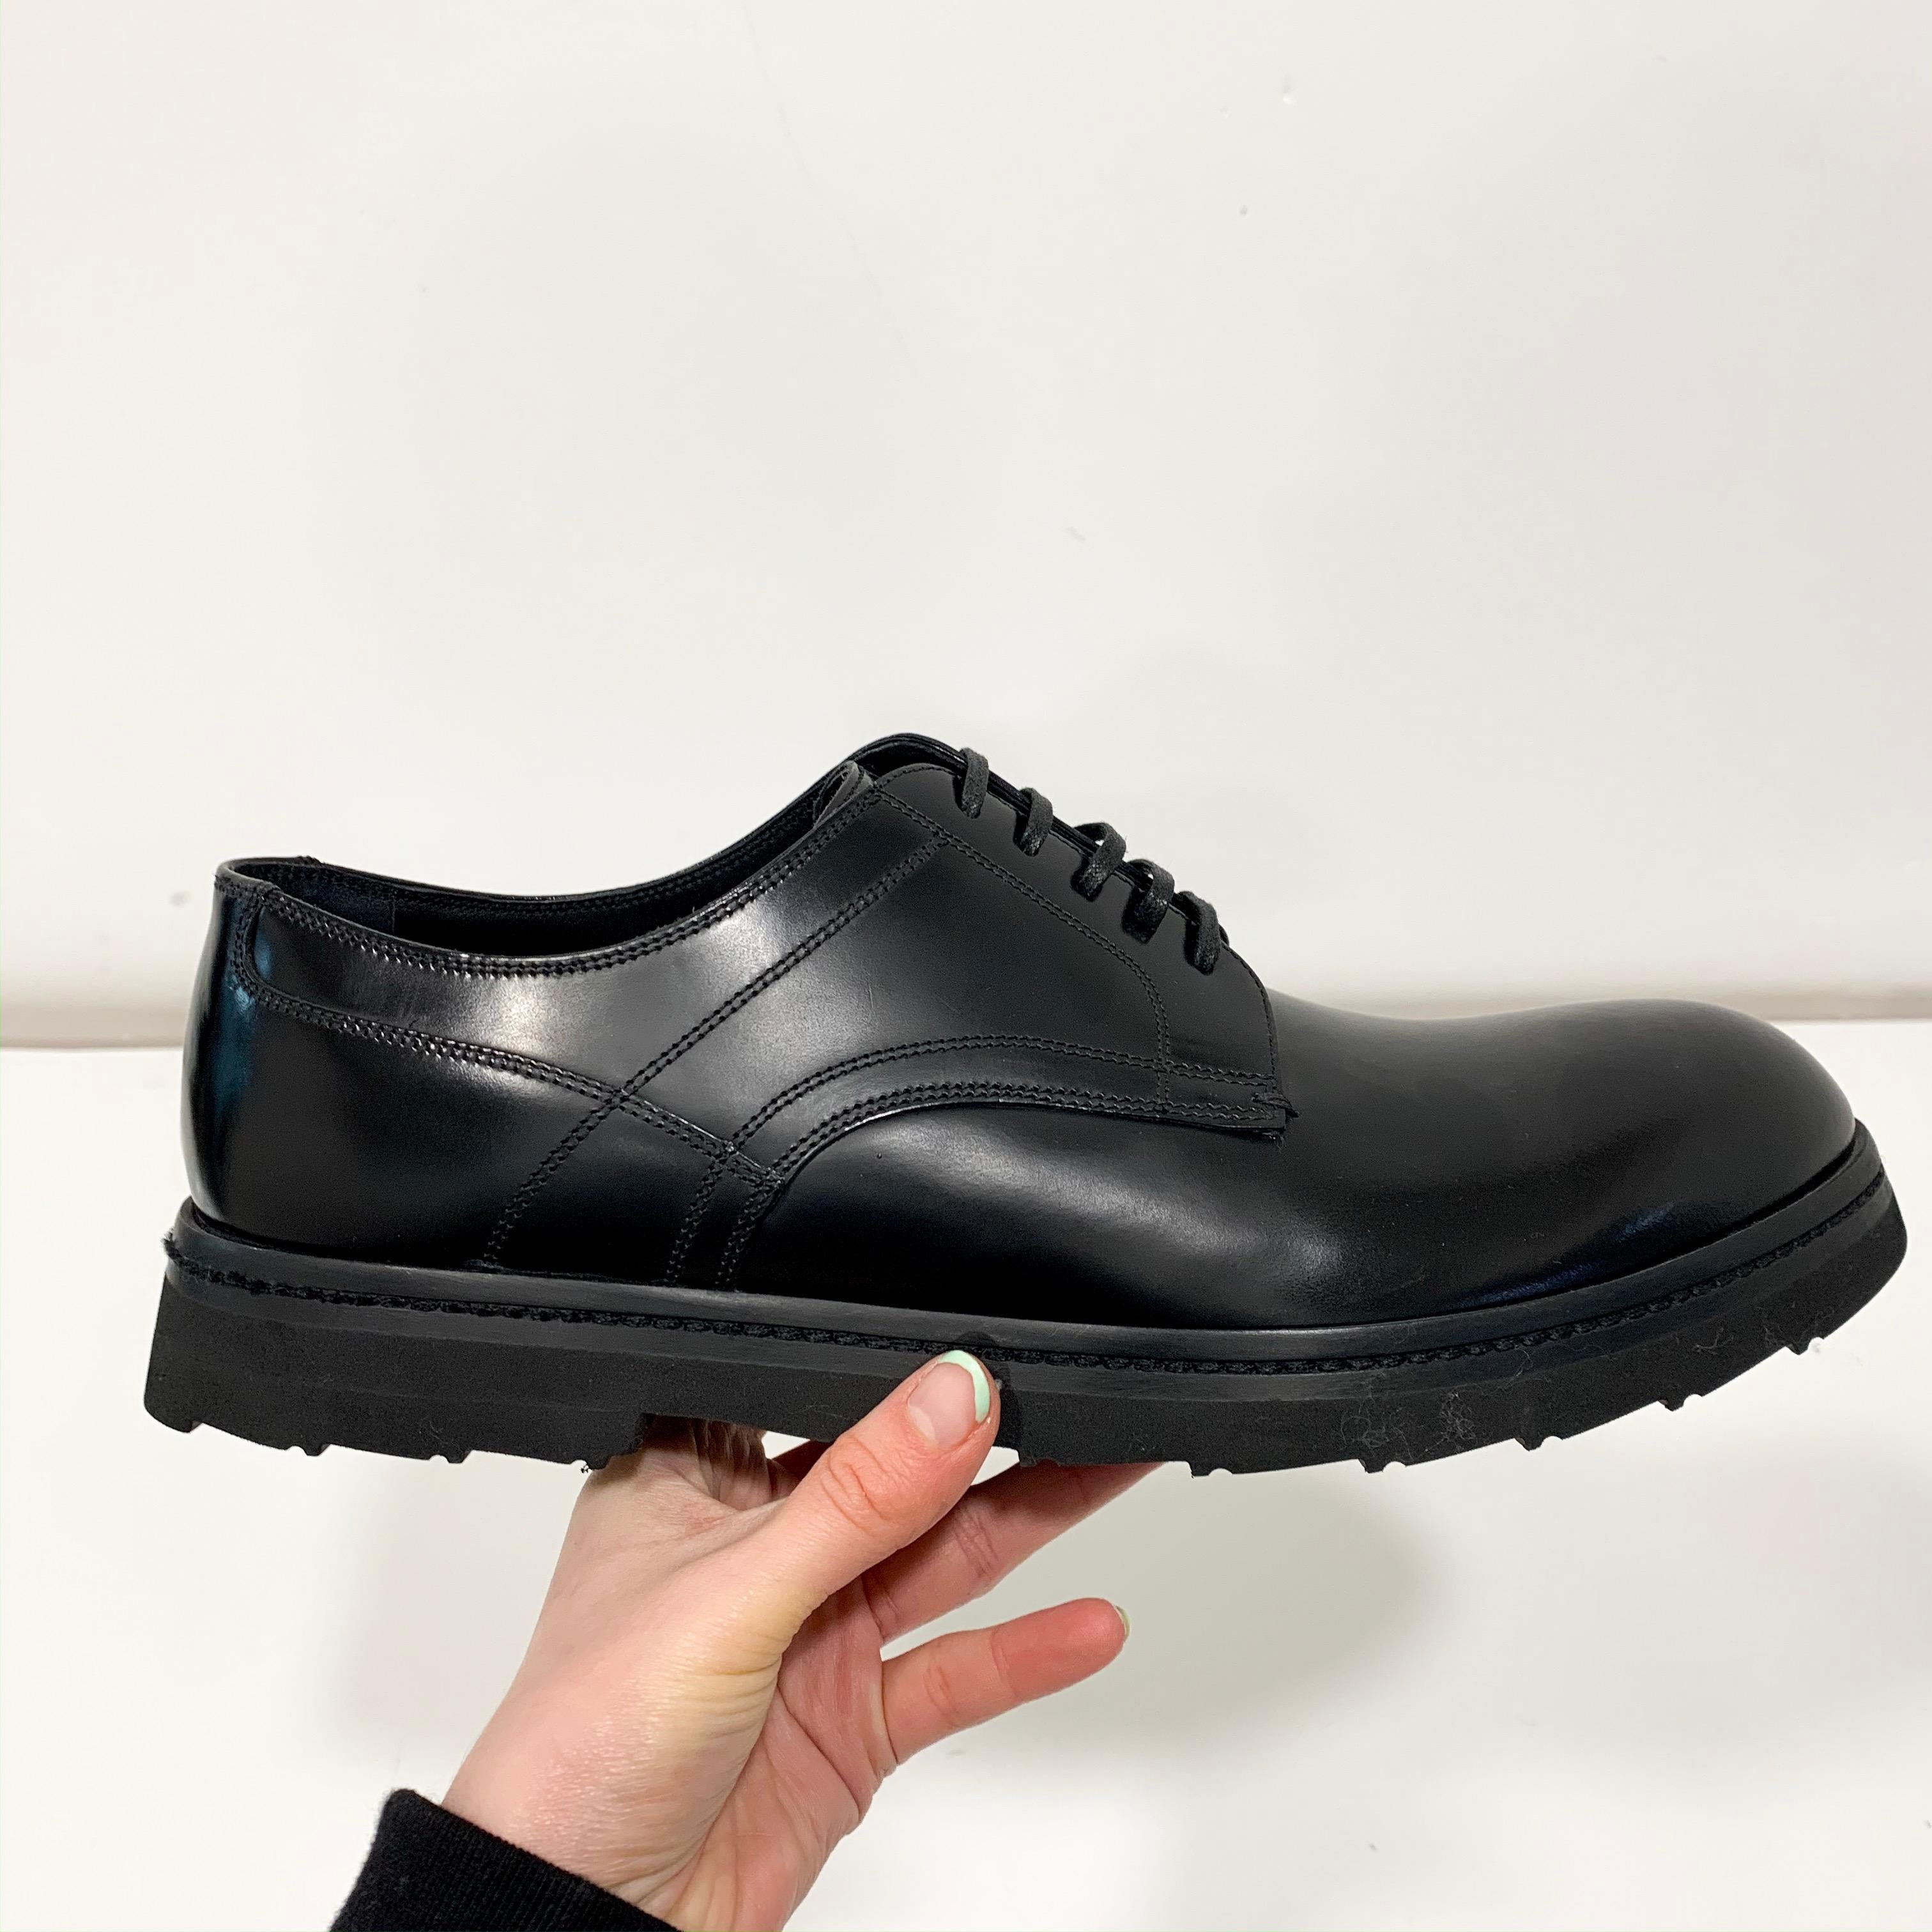 The Dolce and Gabbana men’s Derby shoes are made in Italy form Spazzolato leather. The shoes feature a rubberised sole for extra comfort. The leather laces and leather lining reflect the quality of the shoes. 

Dolce and Gabbana size 9
Uk 9
Eu